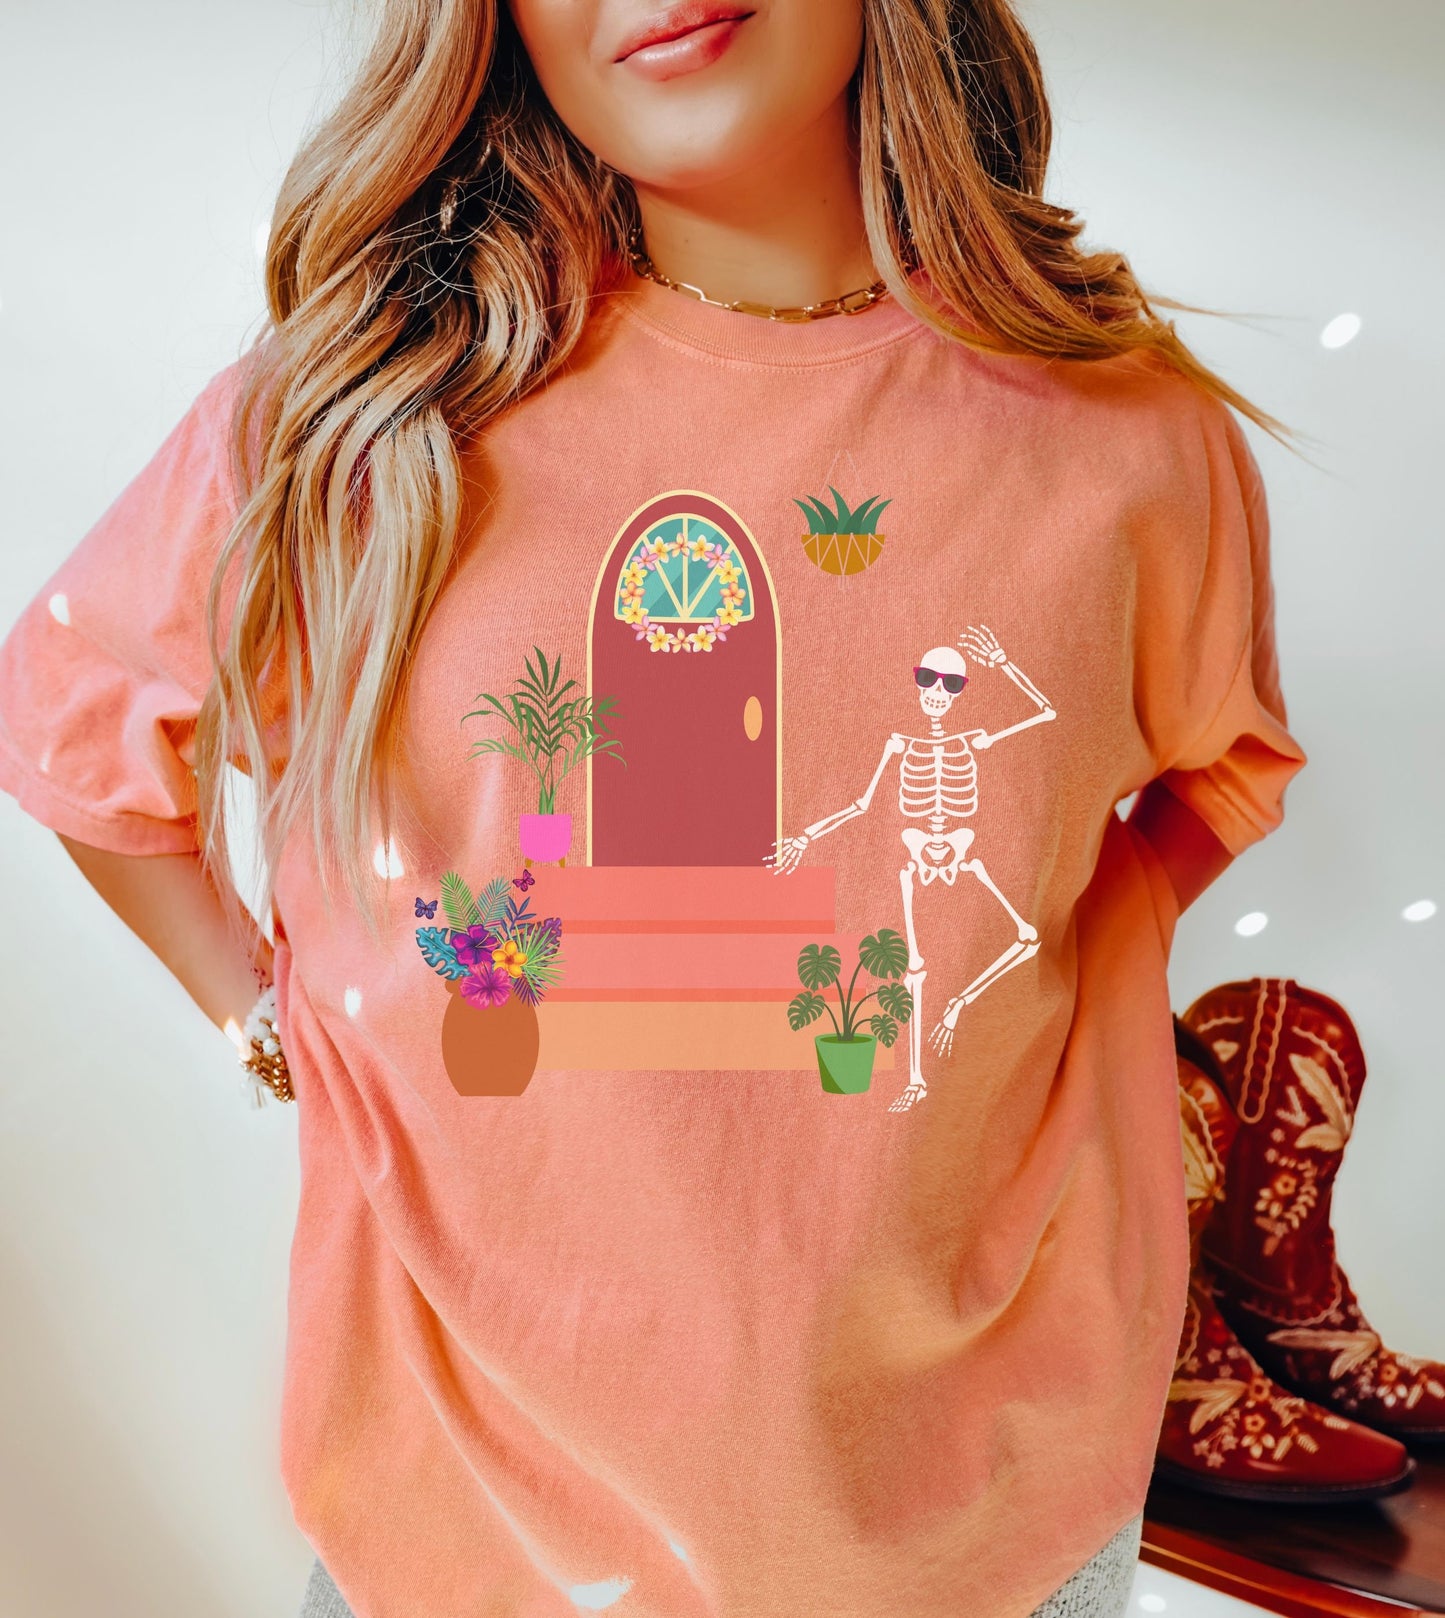 A woman wearing a cute, vintage terracotta colored shirt with a skeleton wearing red sunglasses walking out the front door of their house. The front stoop has colorful plants and flowers and the front door has a pink and yellow flower wreath hanging.